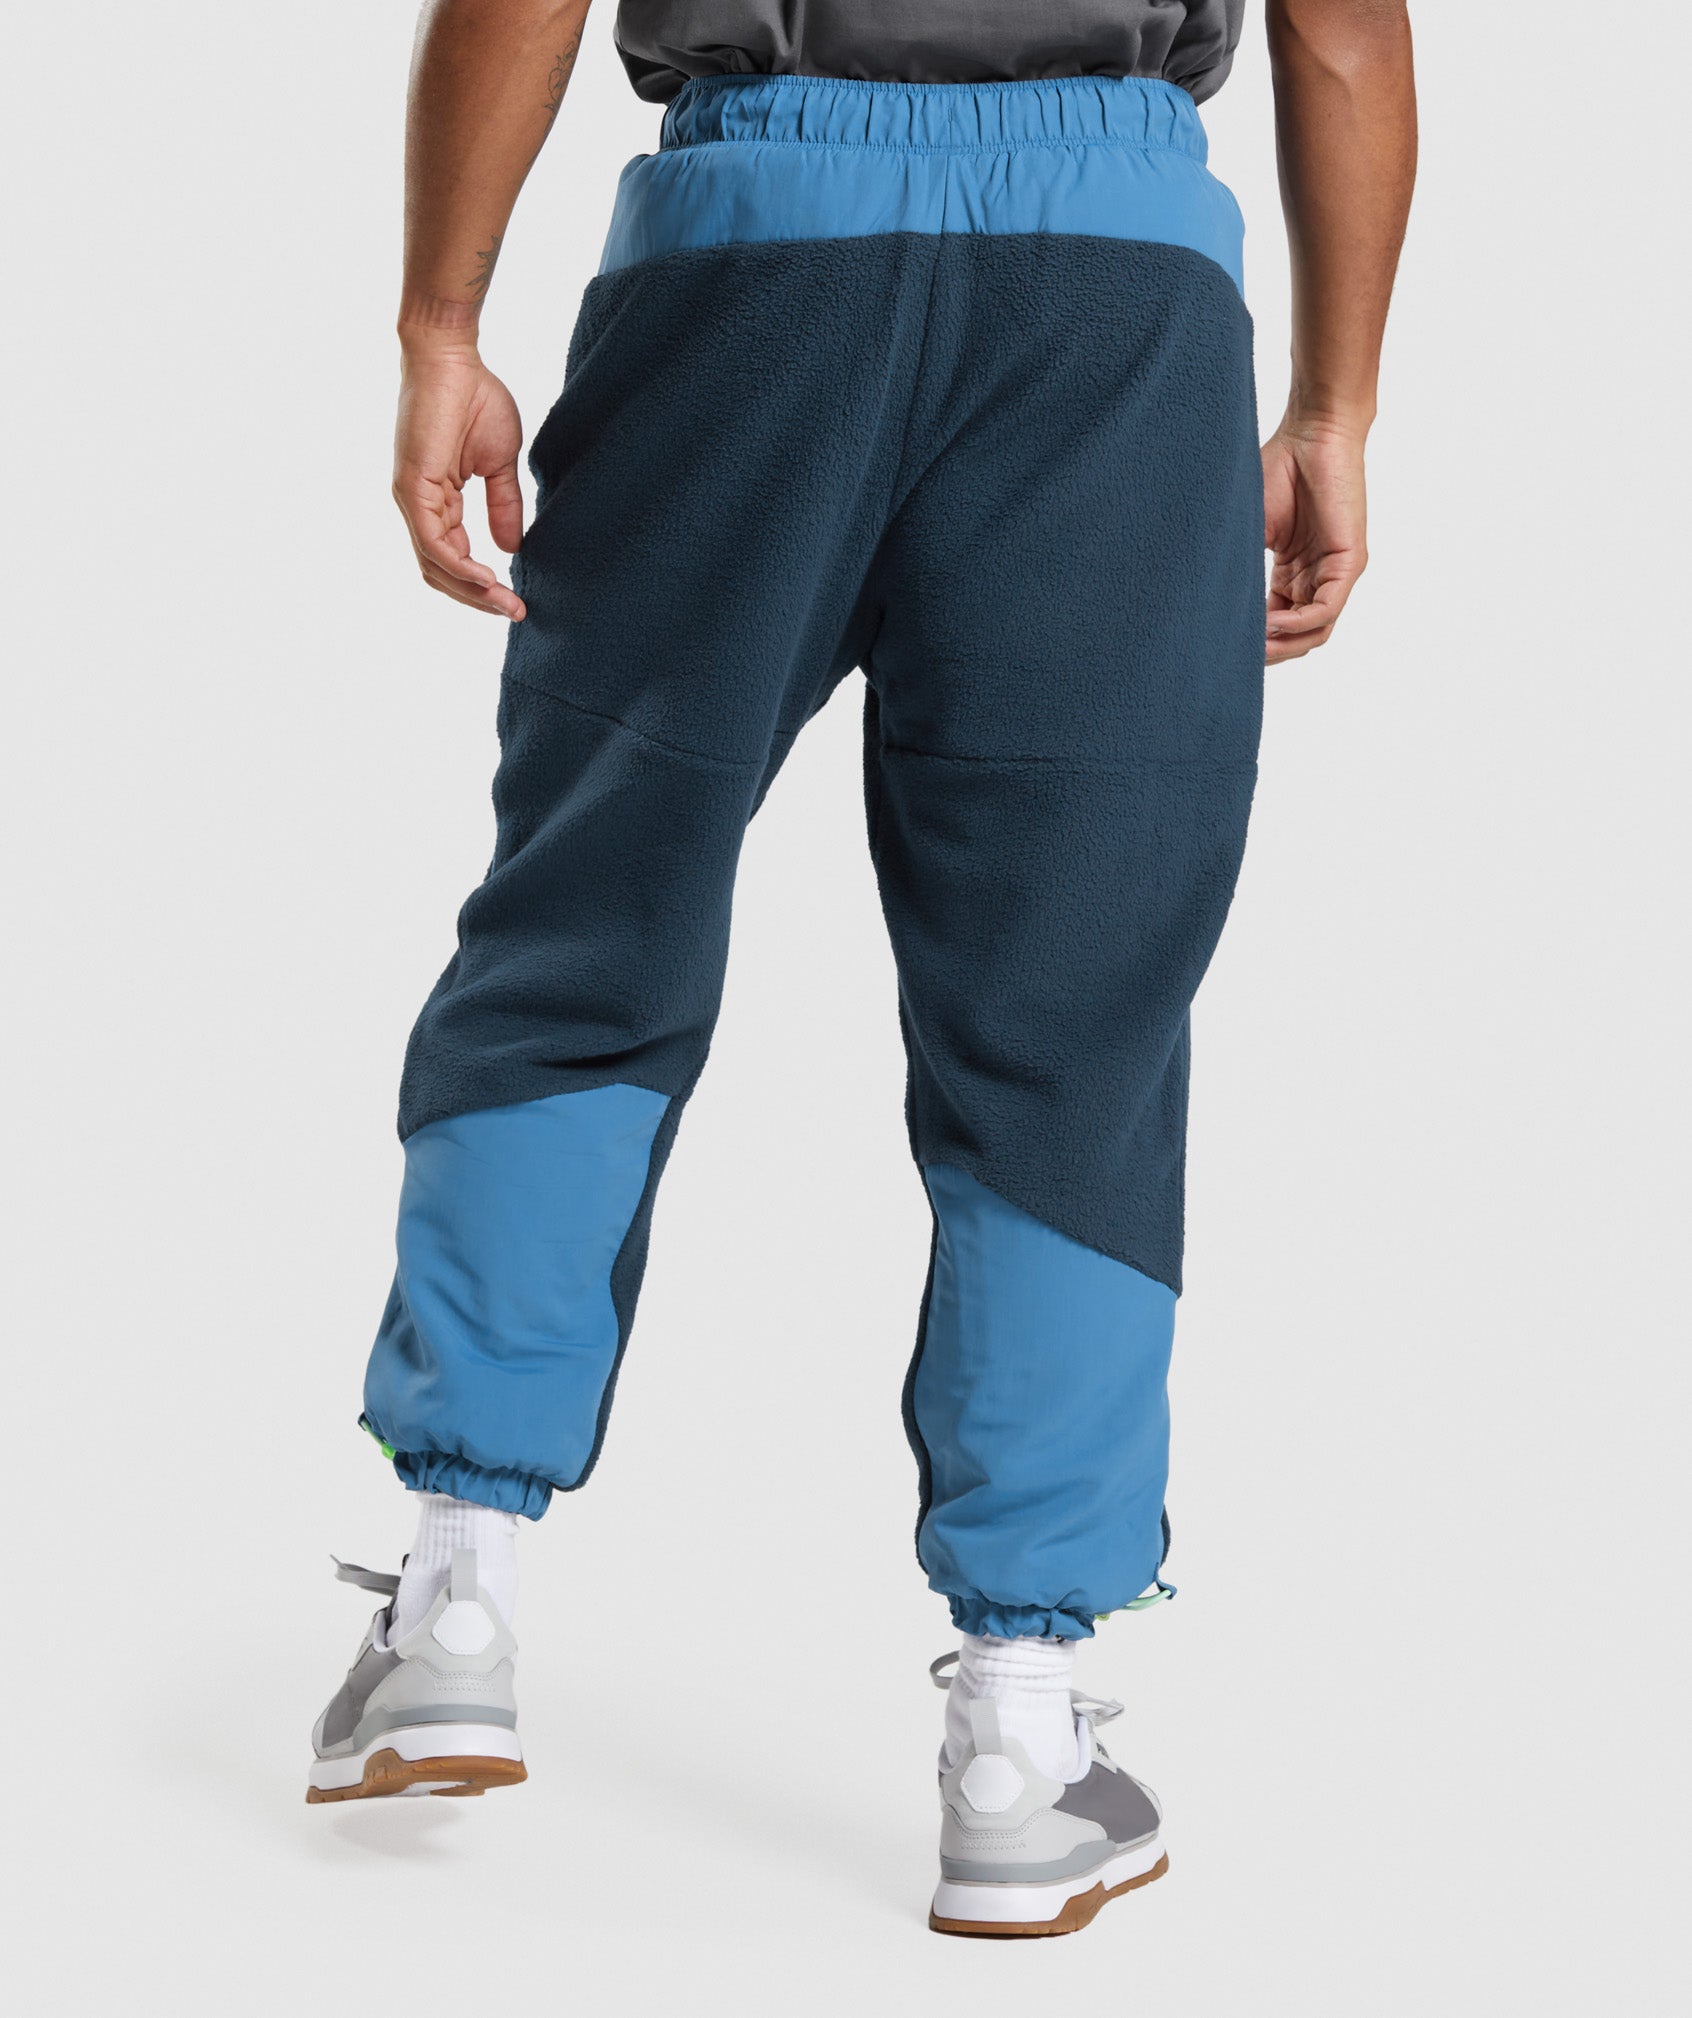 Vibes Joggers in Navy/Lakeside Blue - view 2